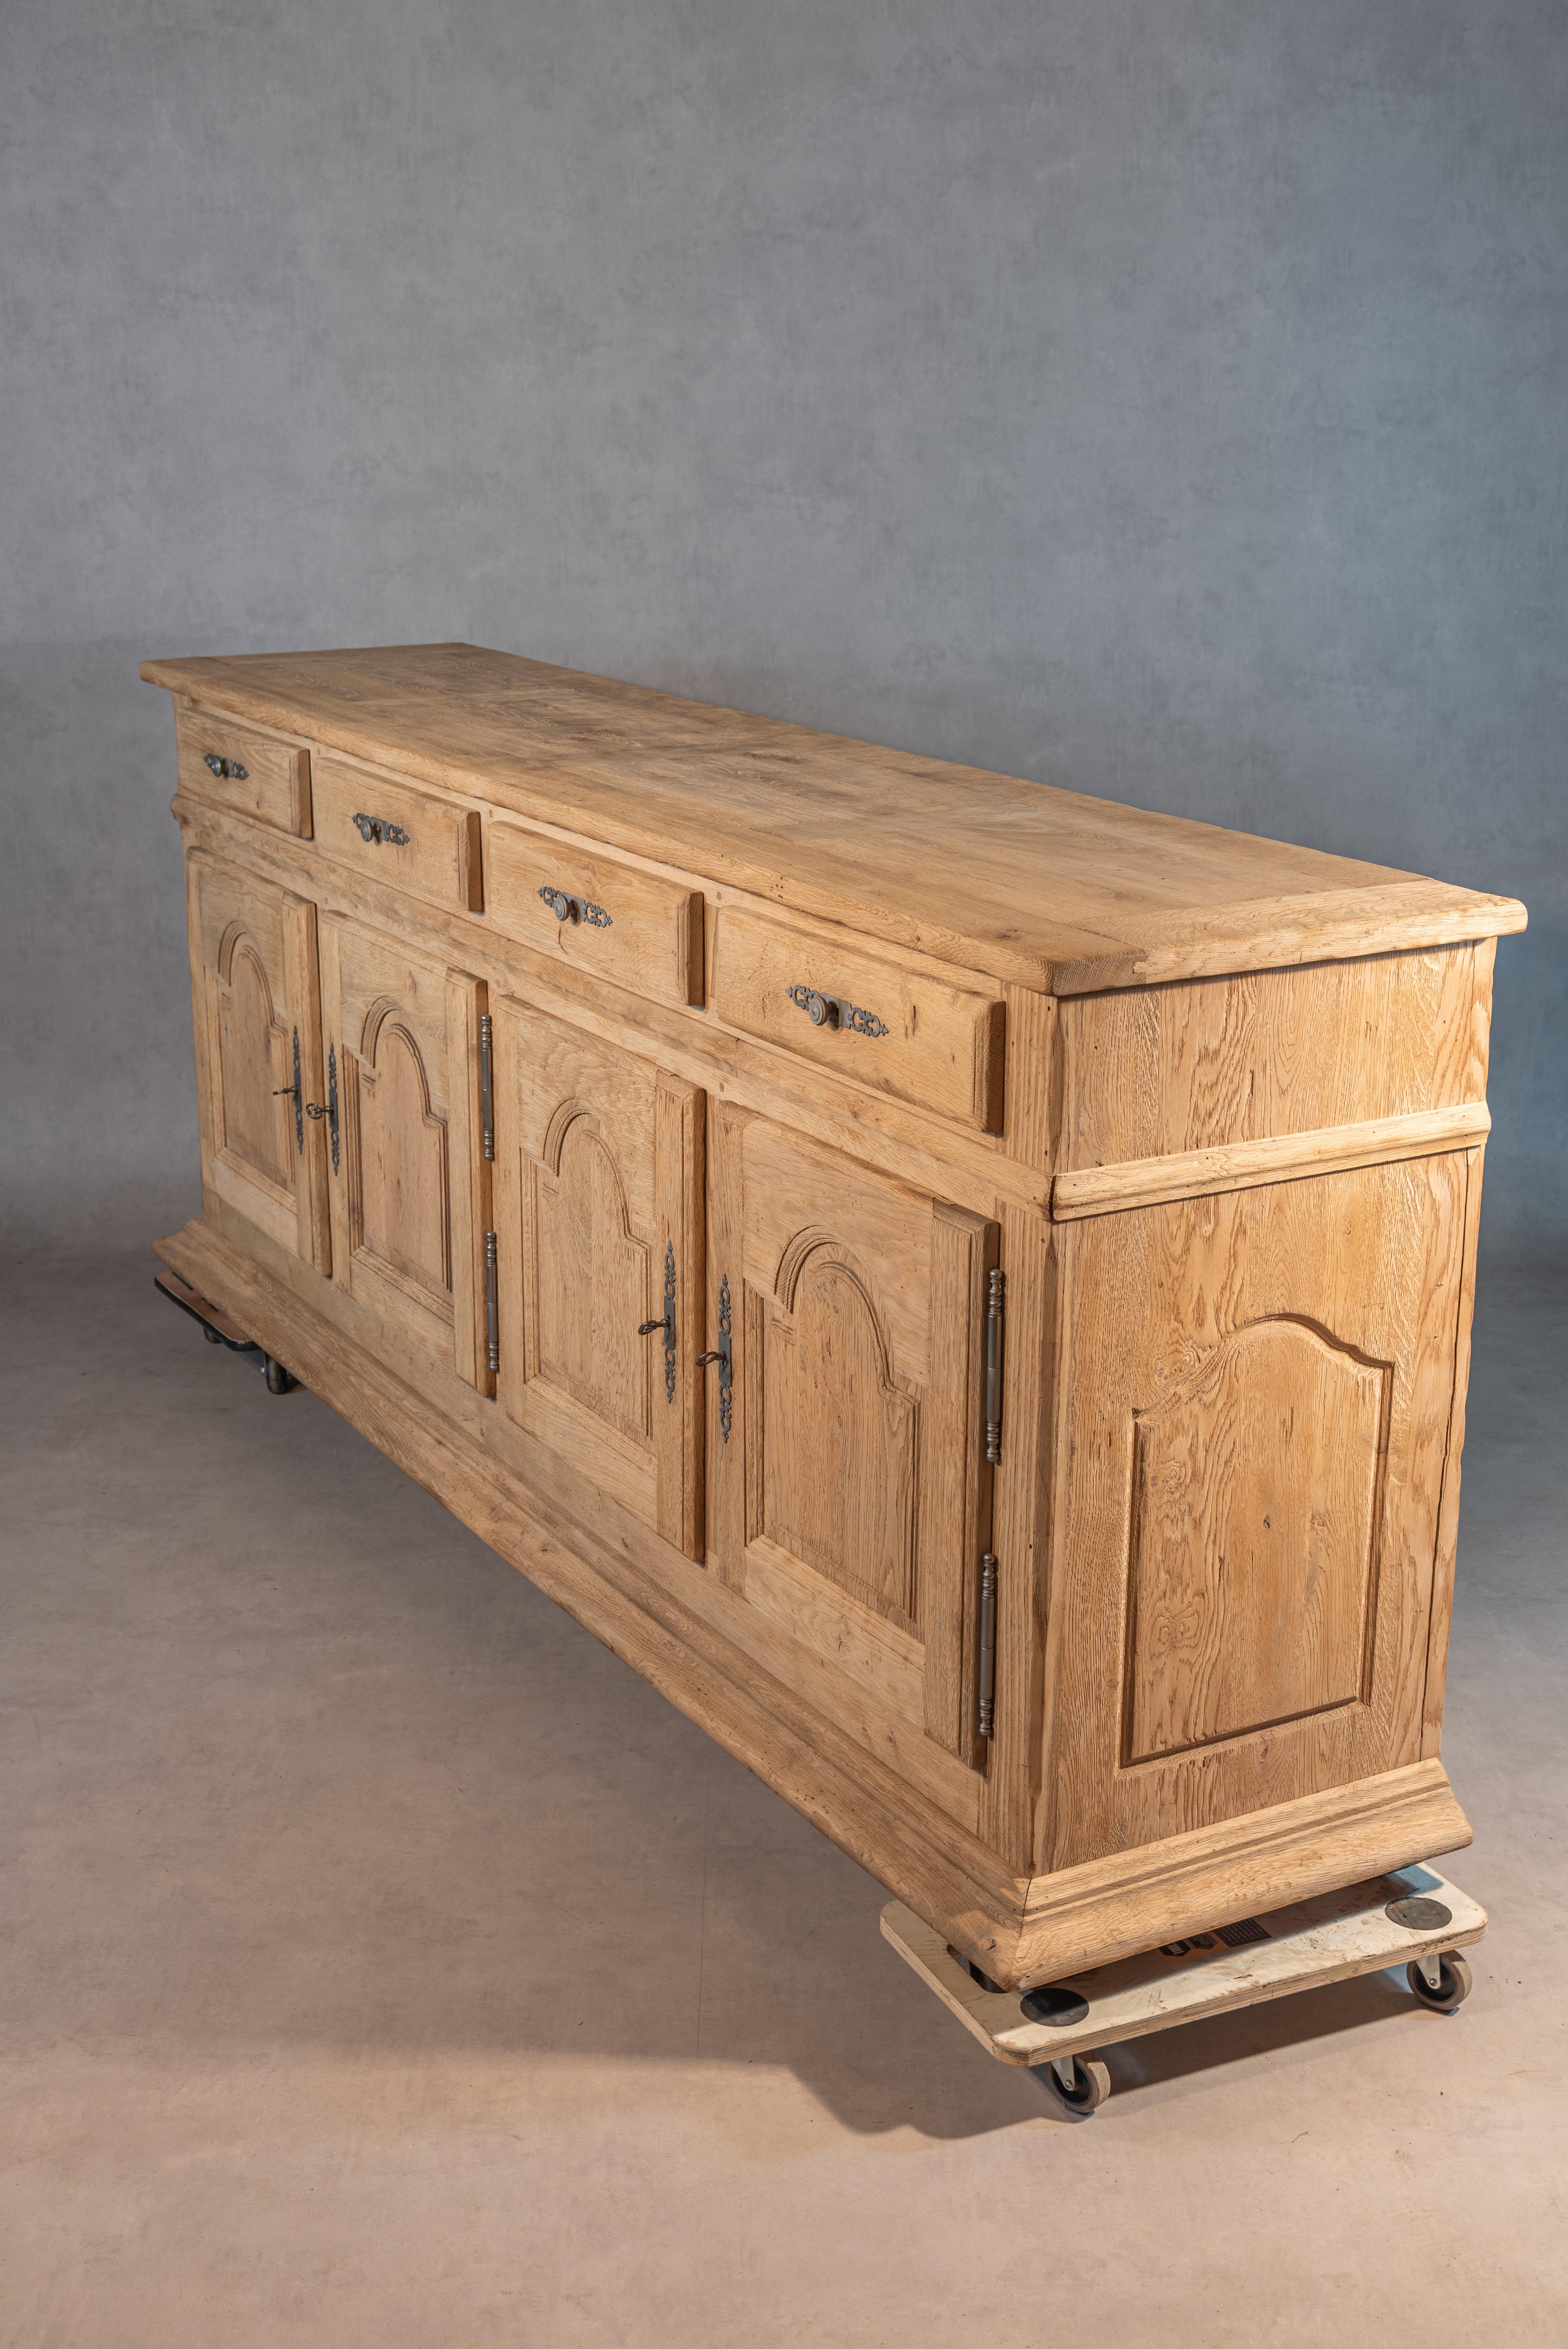 This 20th Century Louis XIV French Bleached Oak Enfilade is a remarkable piece of furniture that showcases exceptional quality and craftsmanship. The enfilade has been professionally cleaned, sanded, and bleached to reveal its beautiful and pure